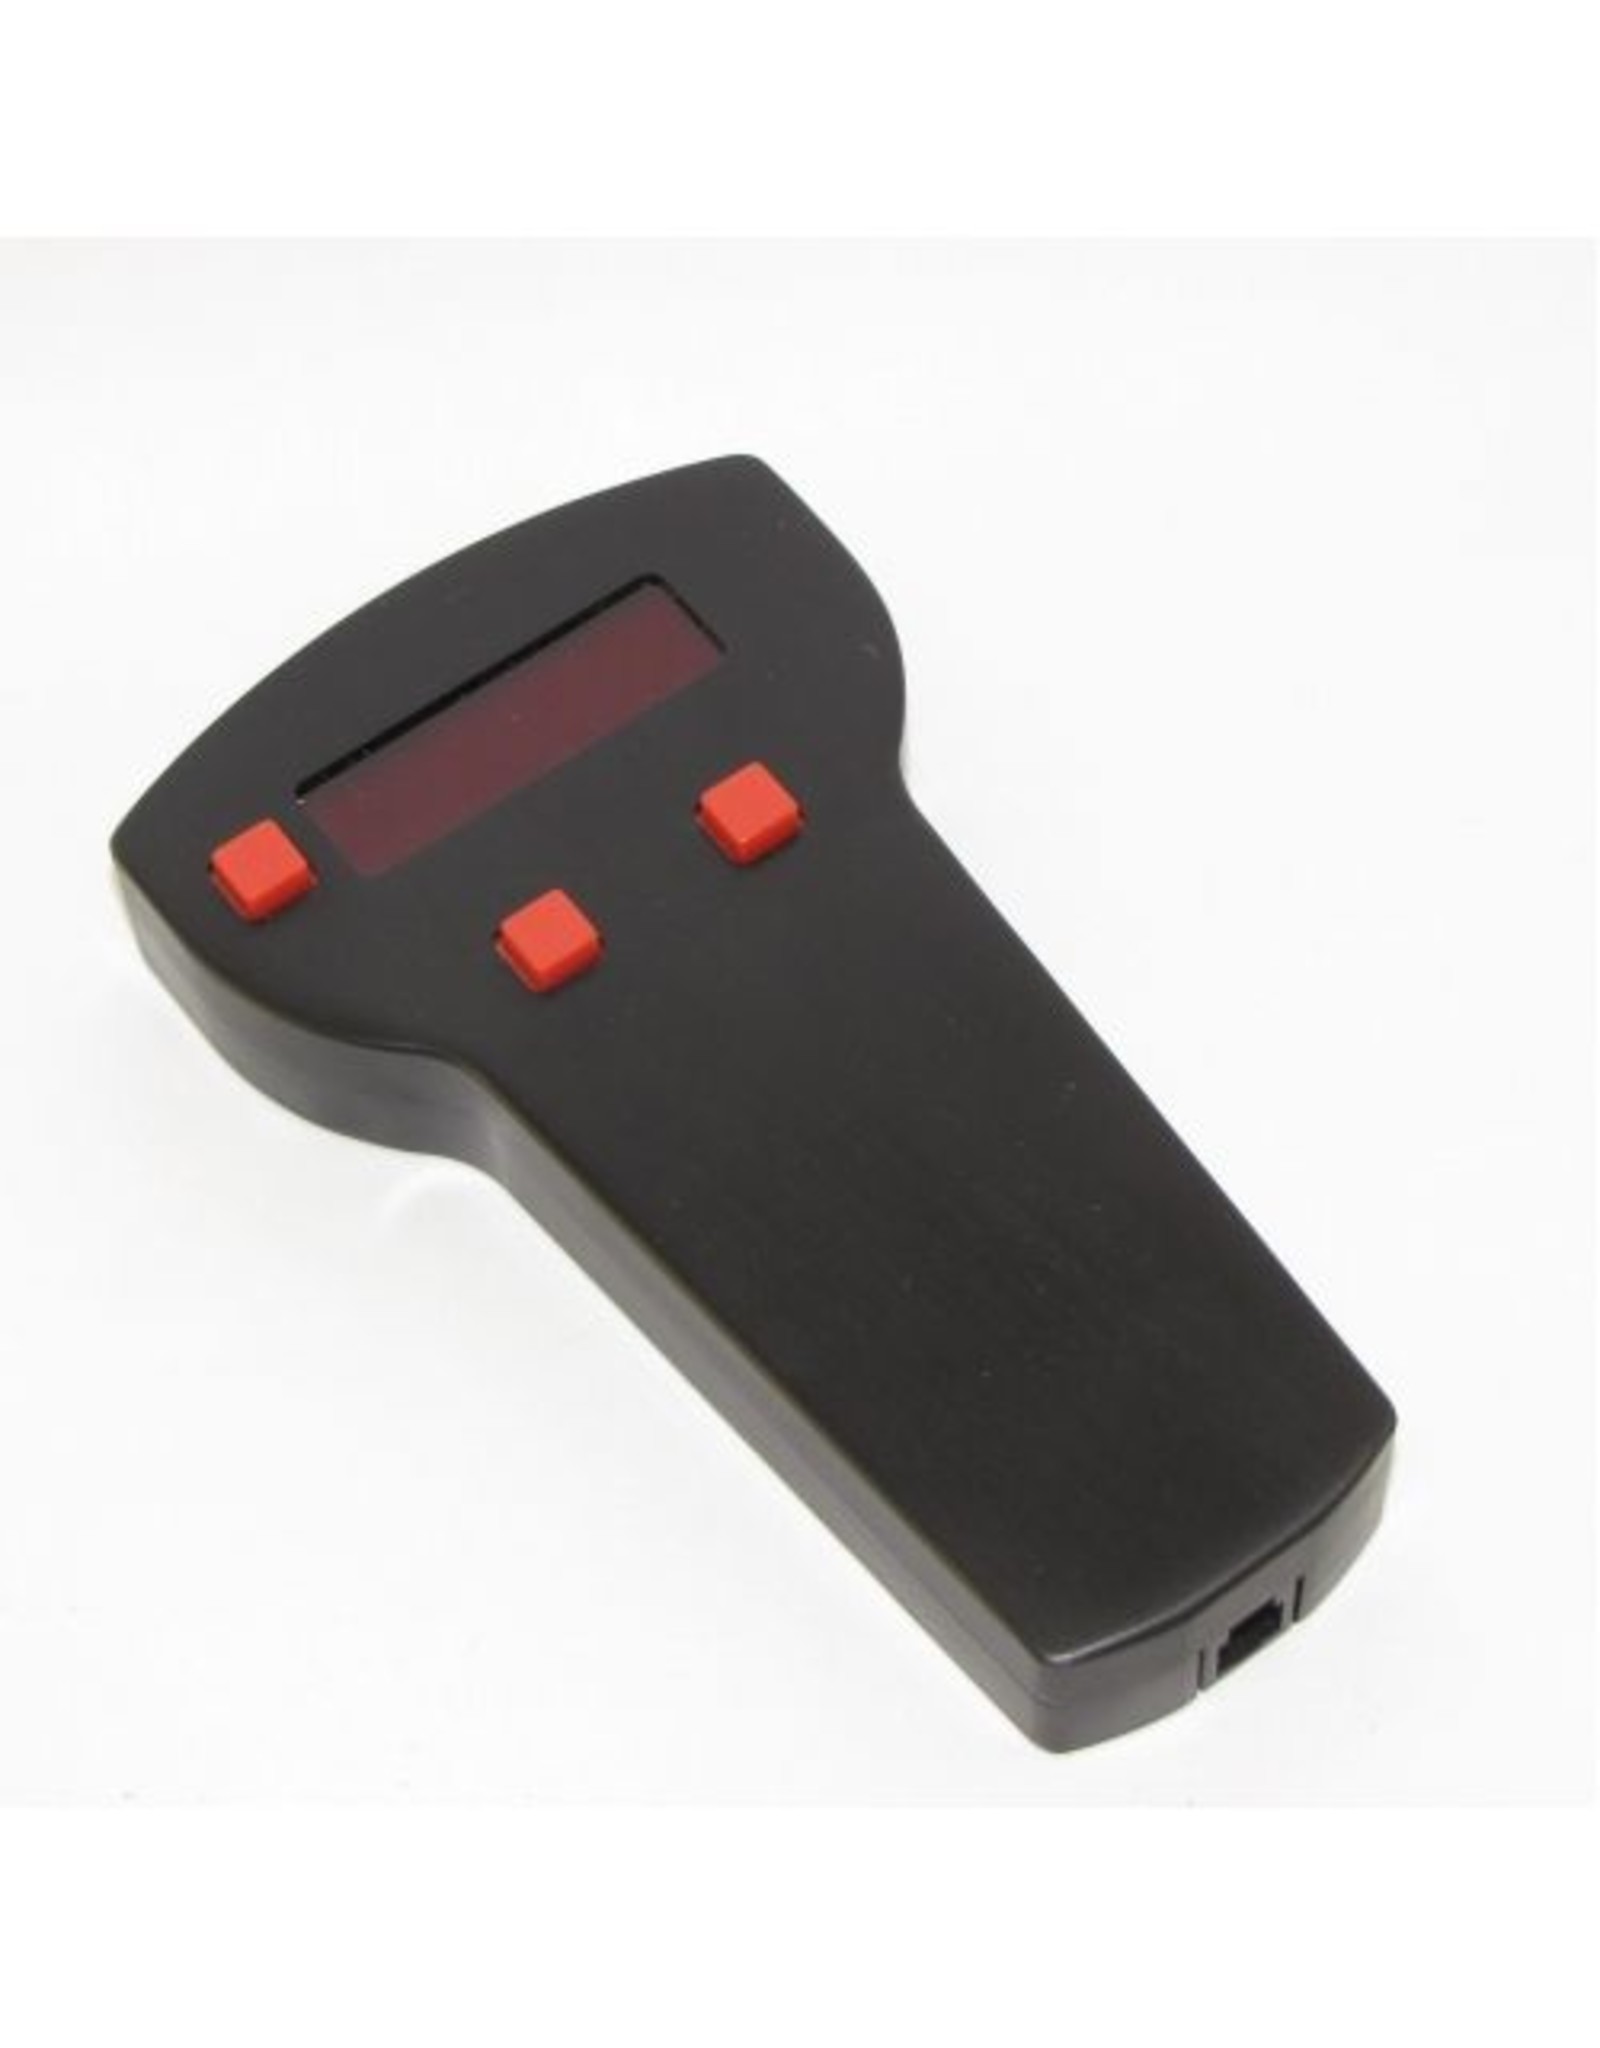 Feathertouch Feathertouch FB-HANDCONTROLLER--Hand controller for manual focuser control